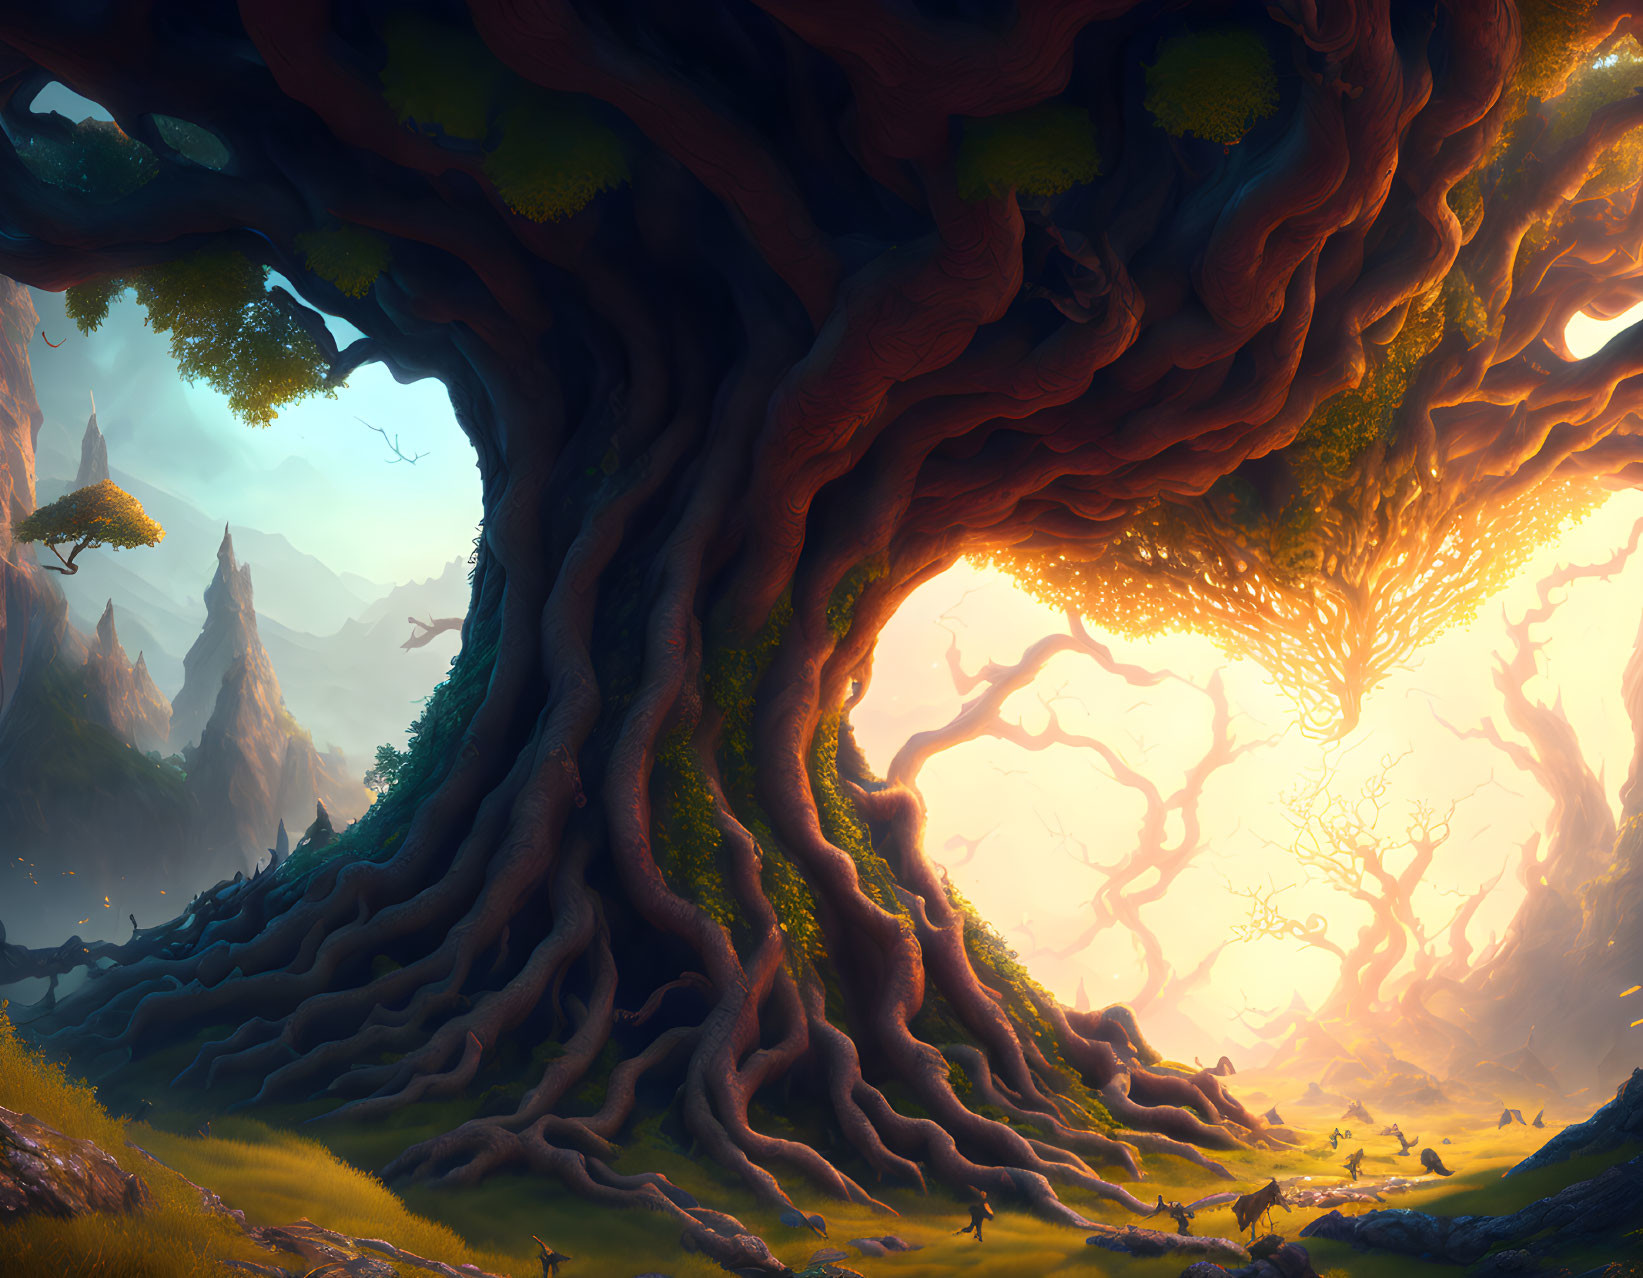 Gigantic ancient tree in mystical landscape with glowing tree